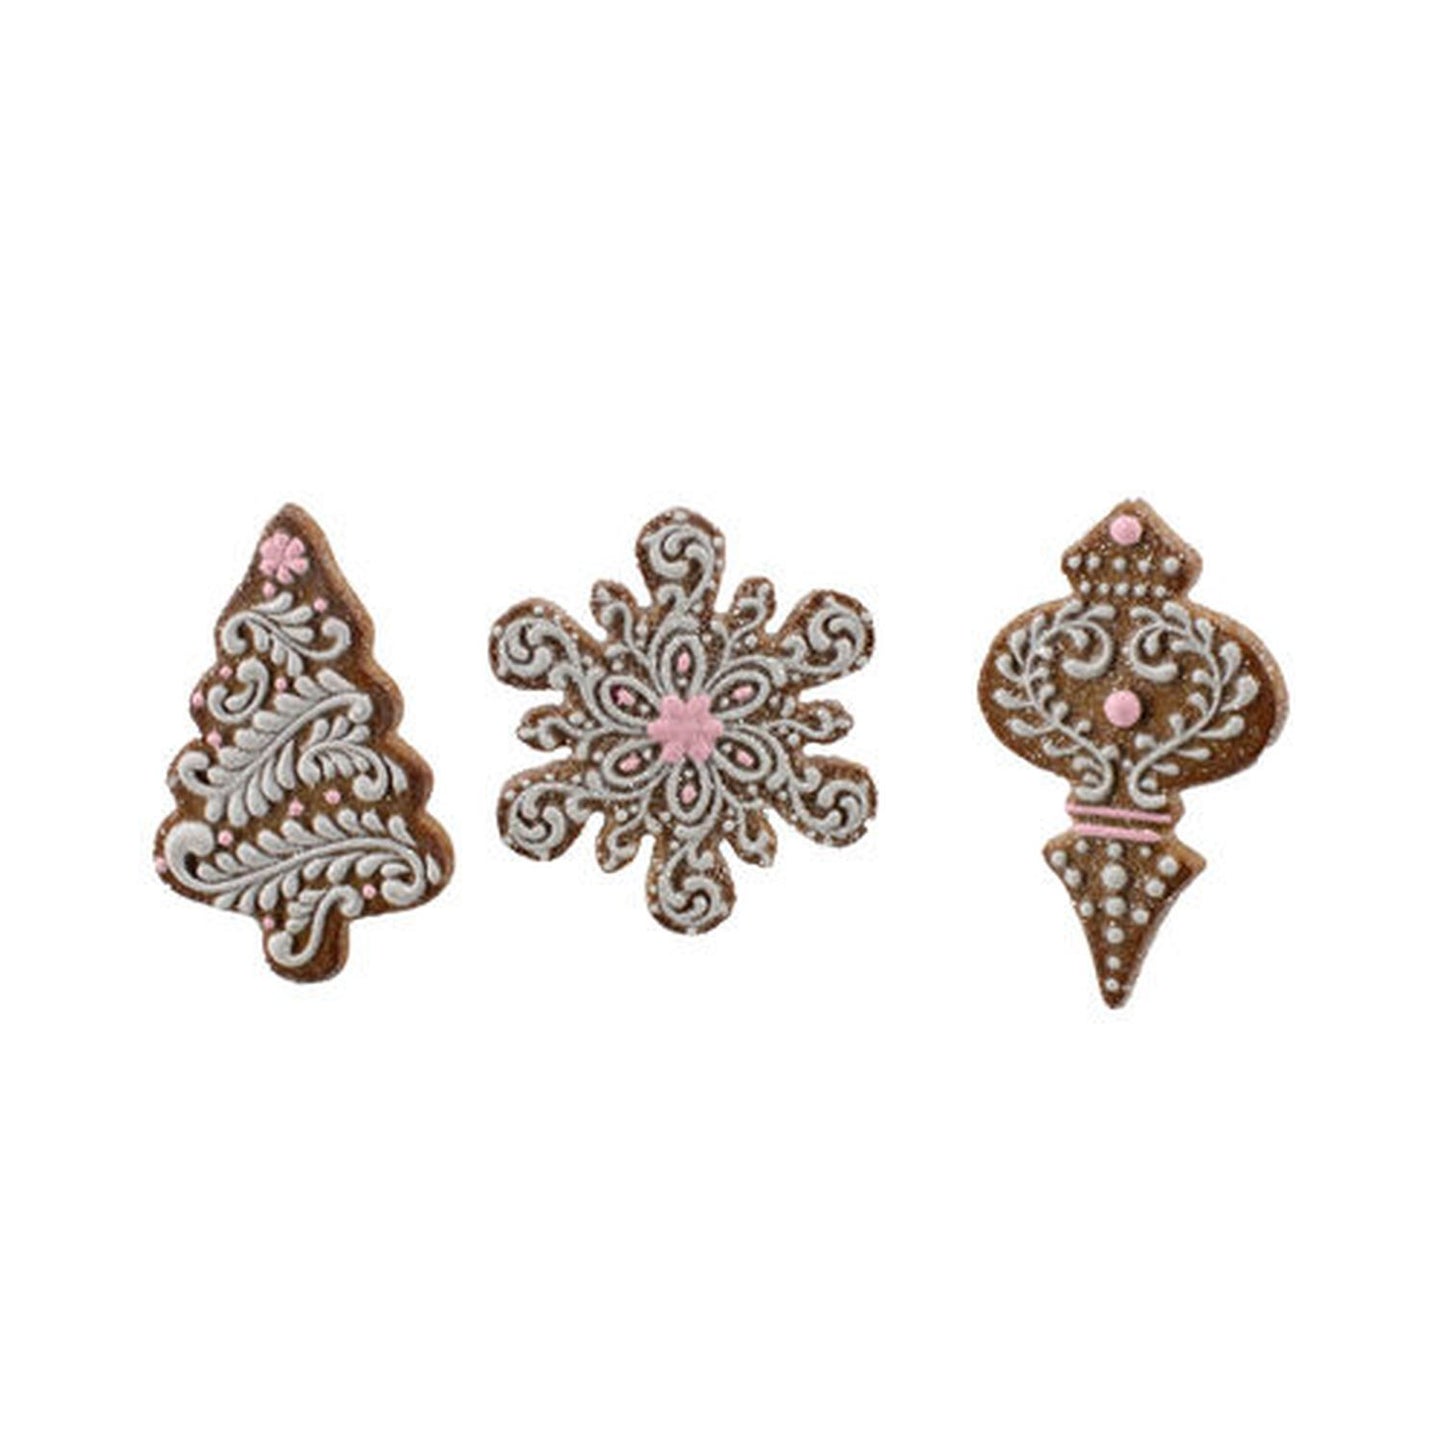 Gingerbread Sweet Shoppe Set Of 3 Assorted Gingerbread Cookies Ornaments